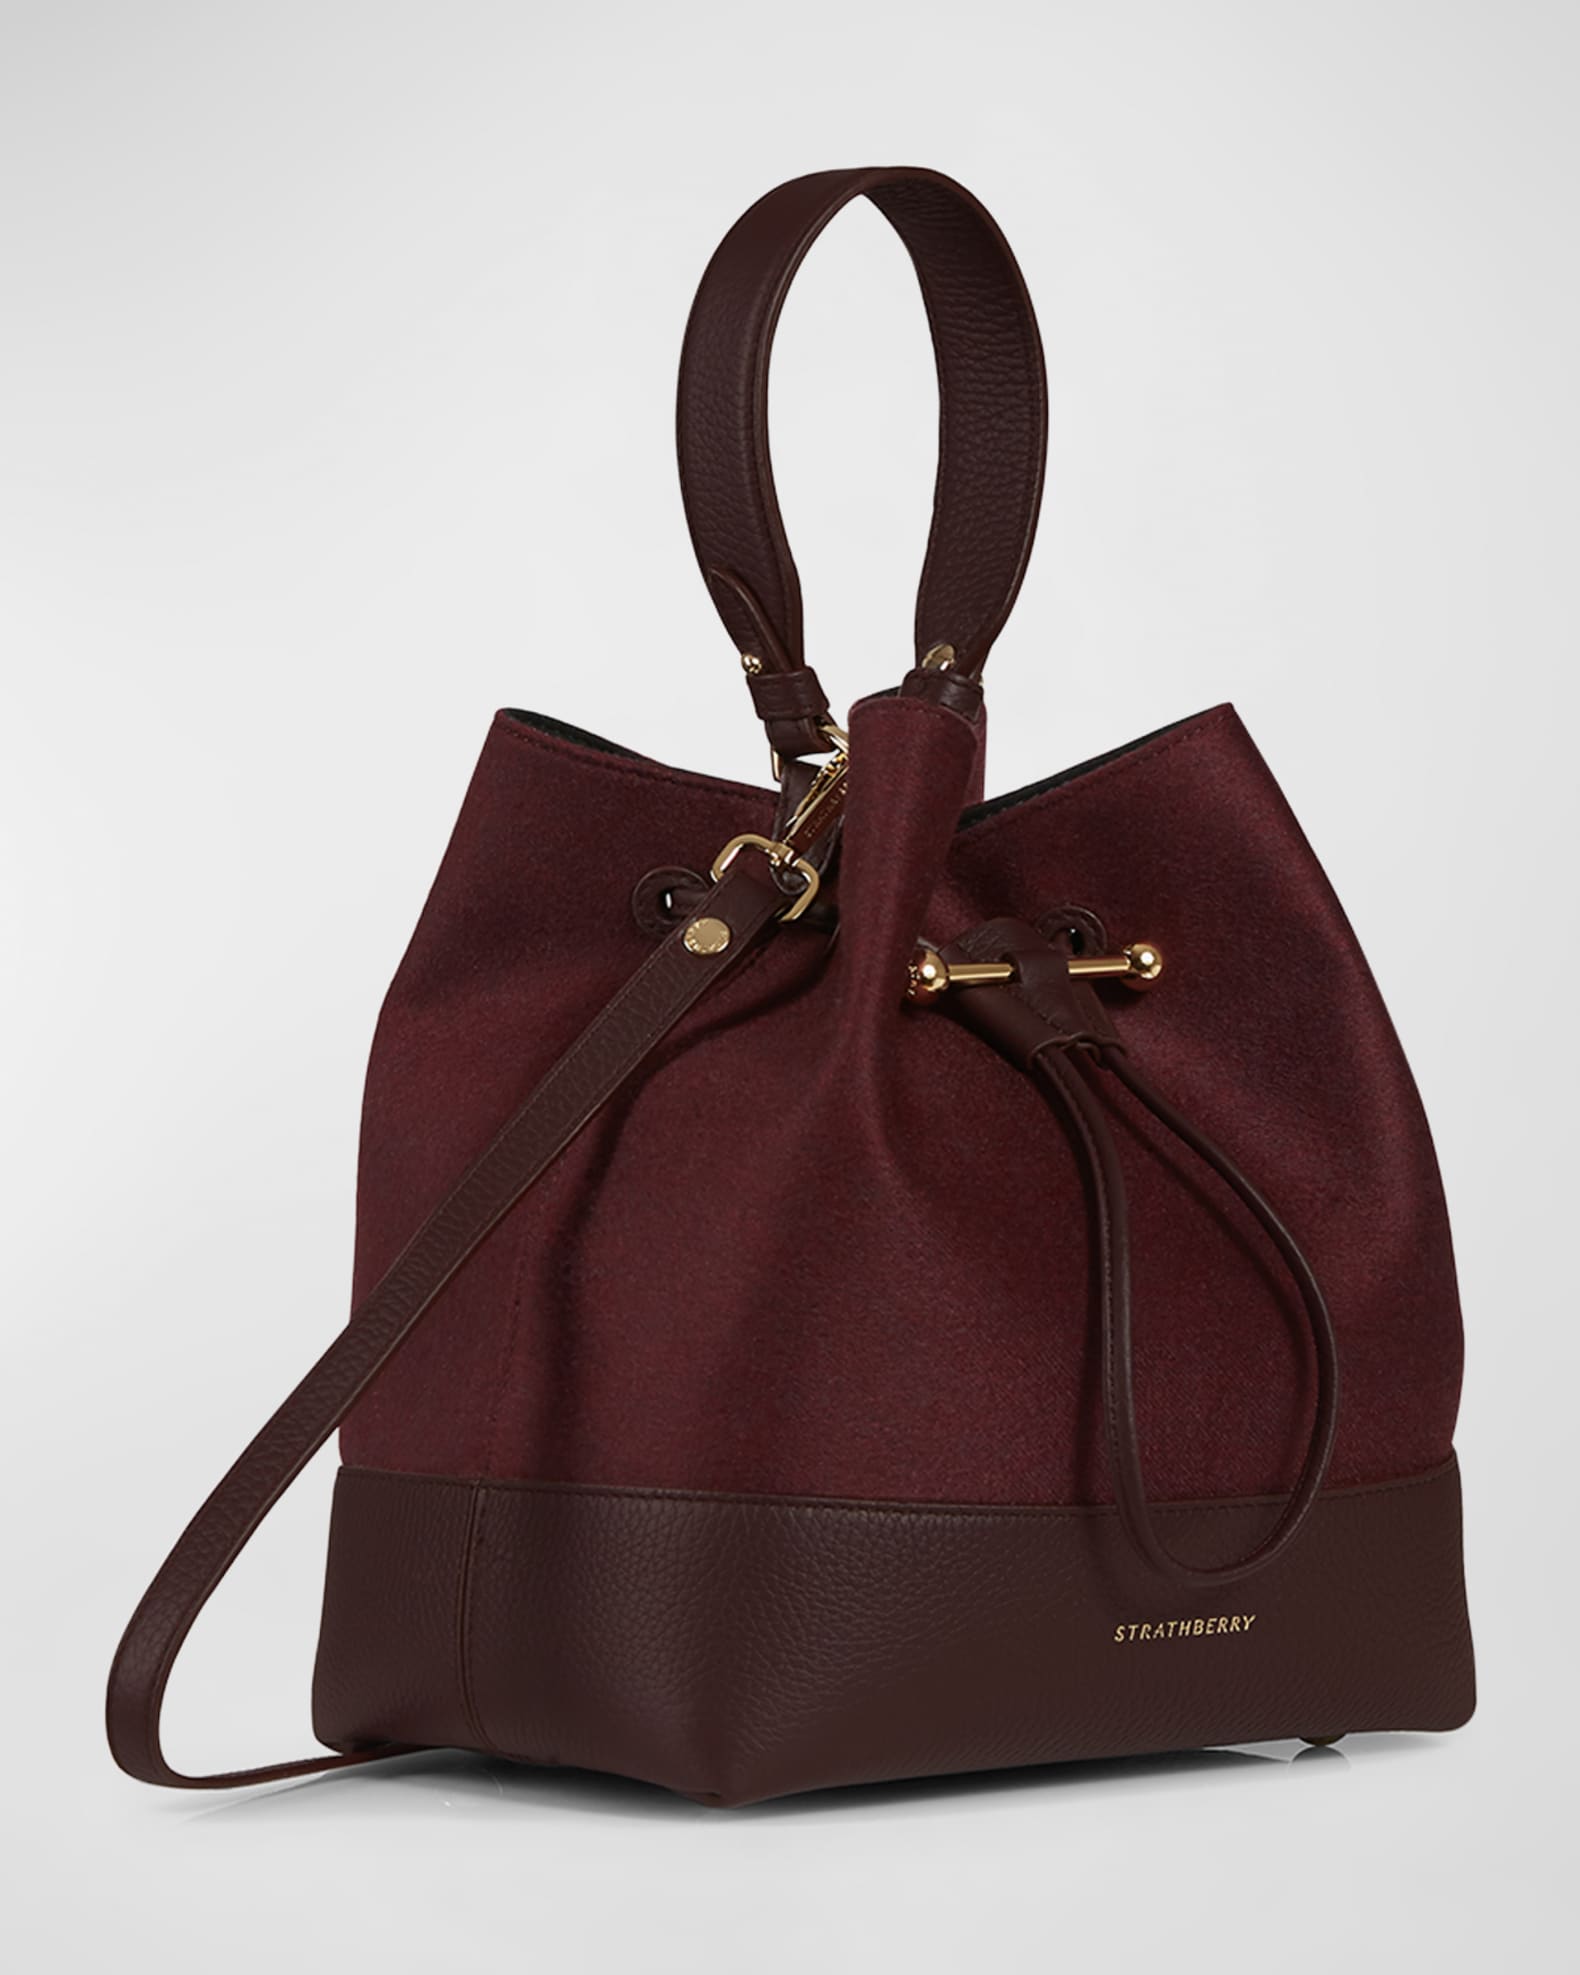 Women's Bucket Bags at Strathberry - Bags